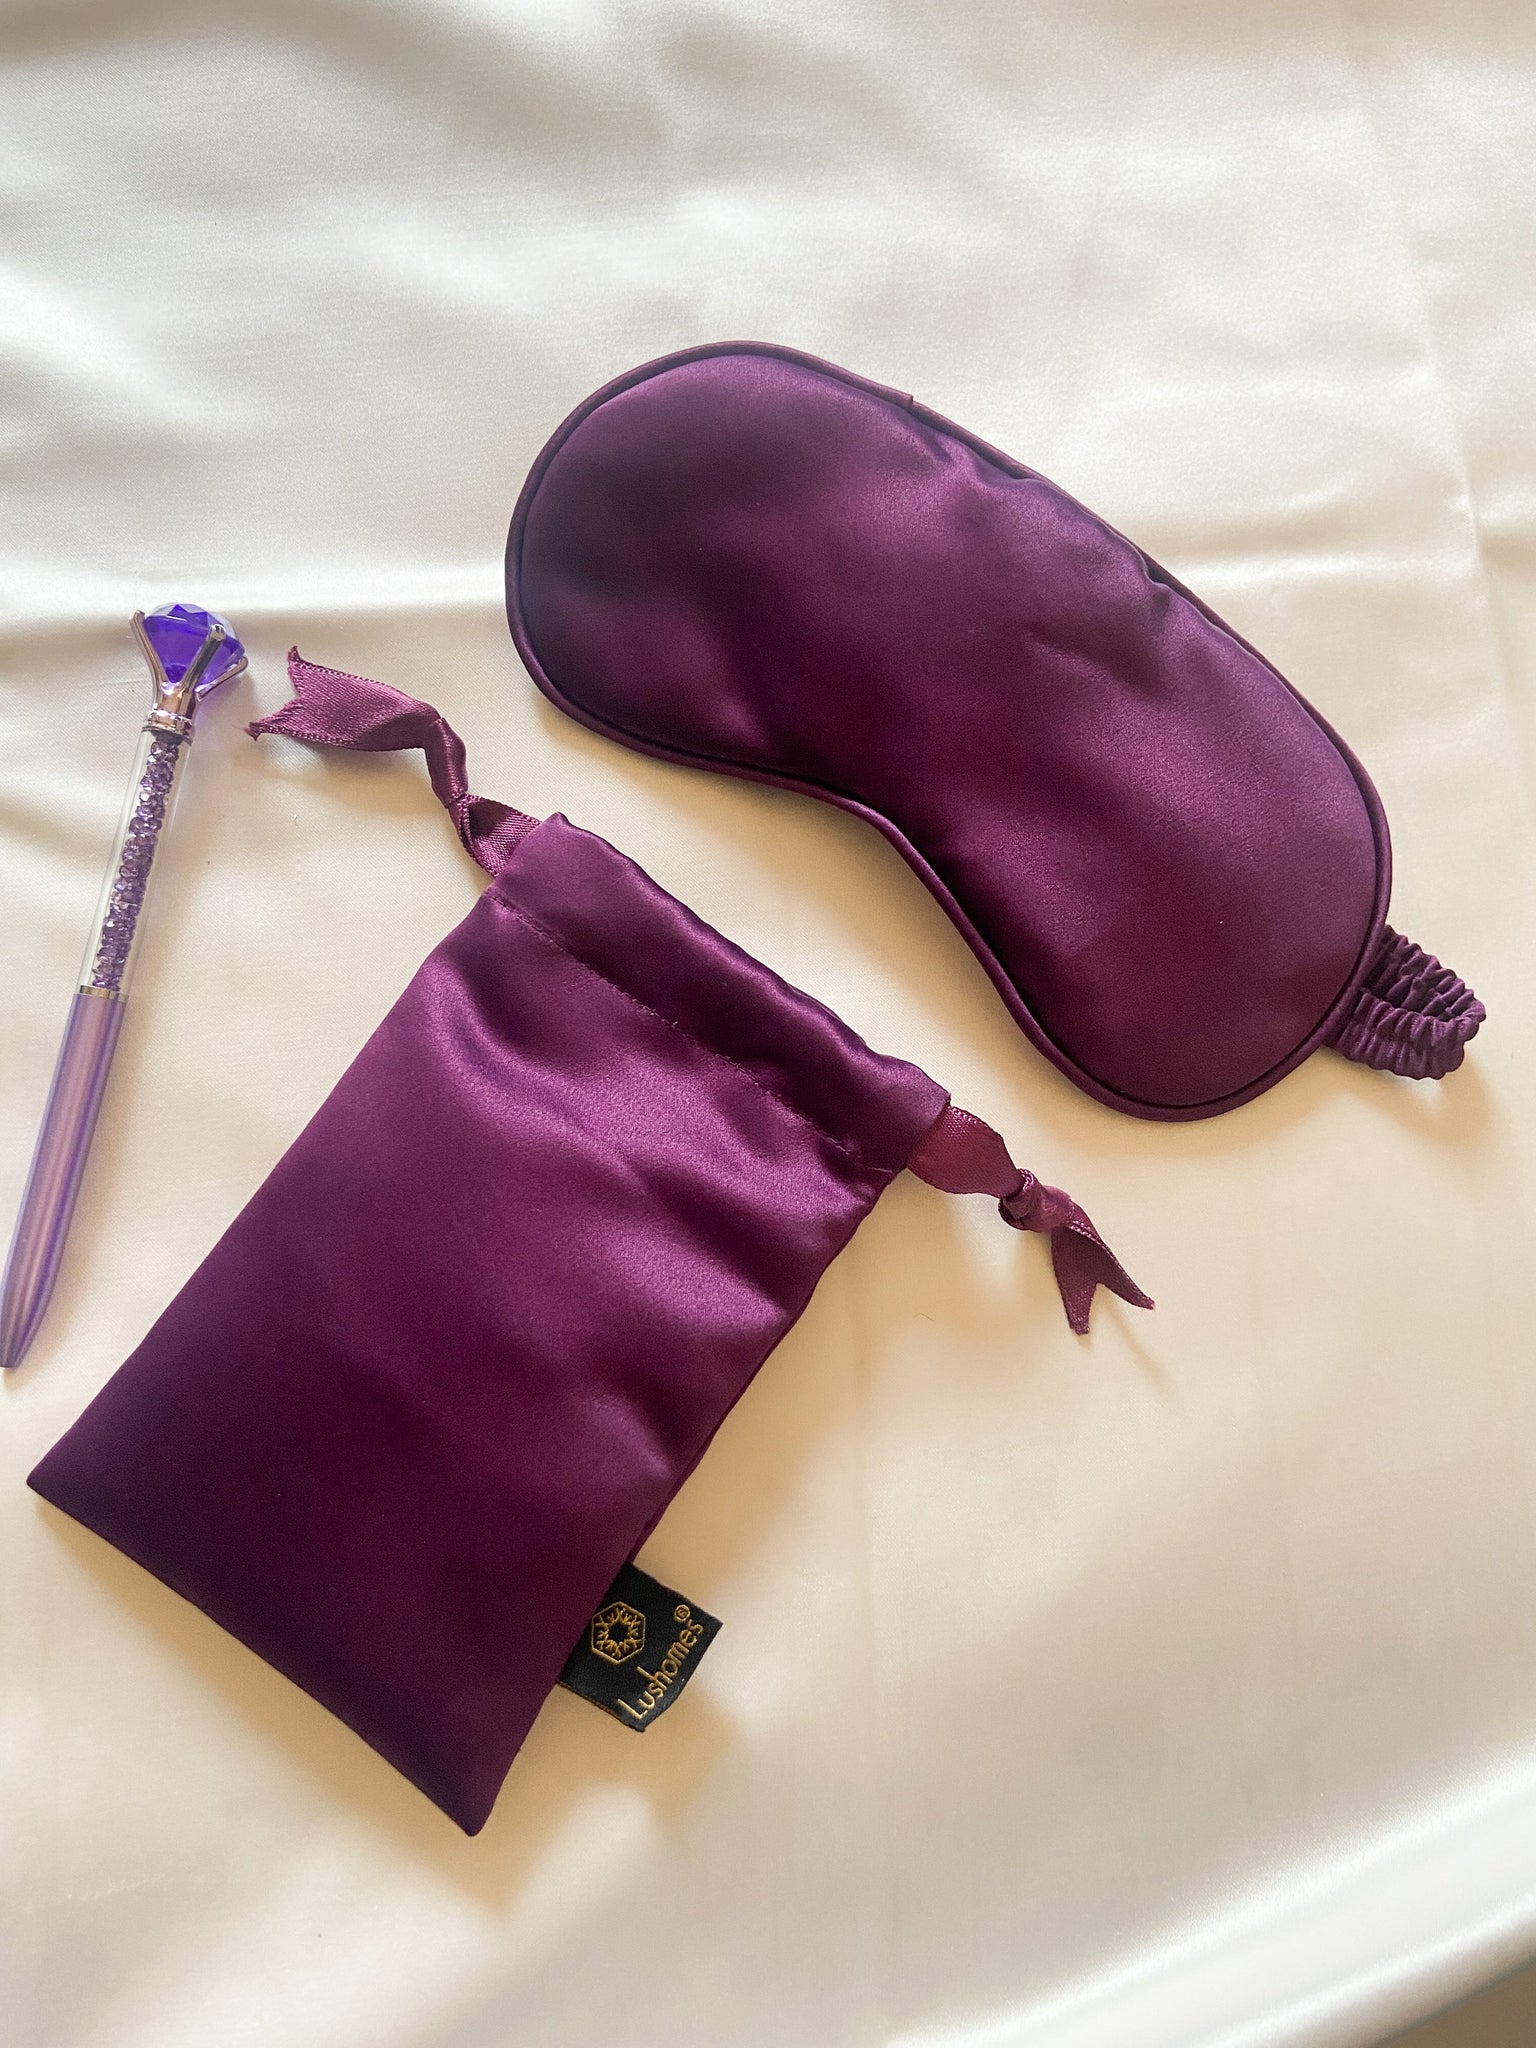 Lushomes Eye Mask for Sleeping, Plain Purple Satin Mulburry Silk Eyemask with piping & fabric covered elastic with Pouch for women, for Men, Blindfold, under eye mask, Meditation Accessories  (Pk of 2 - 1pc of eyemask + 1 pc pouch) -